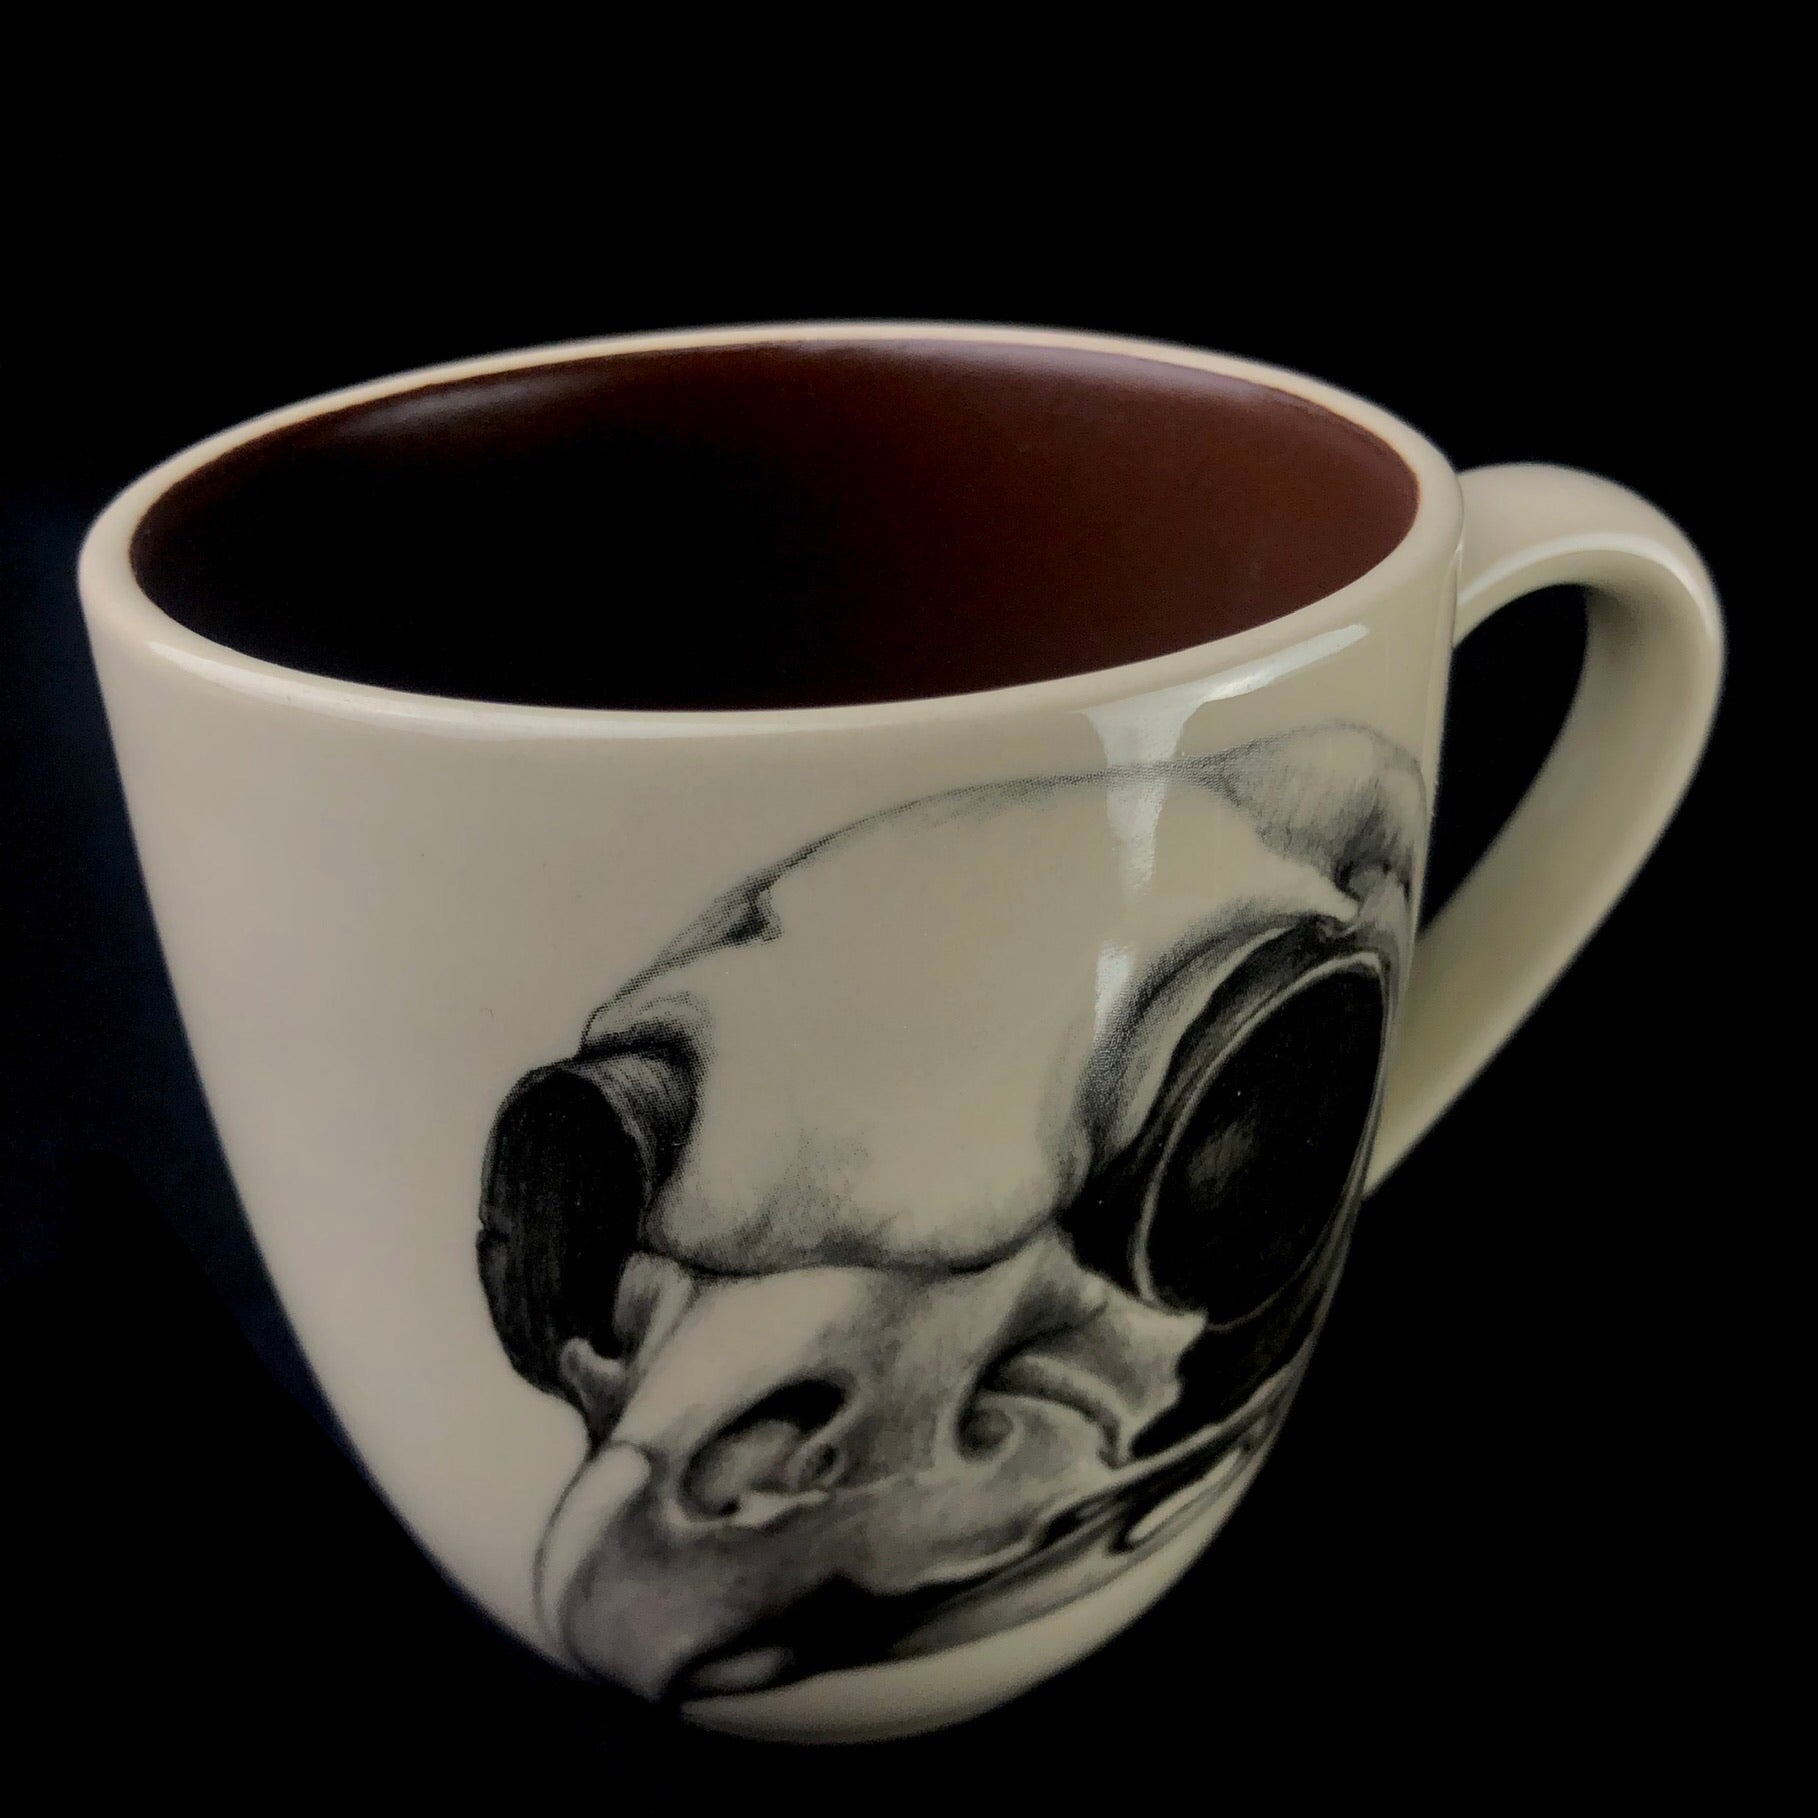 Top view of Owl Skull Mug with brown interior